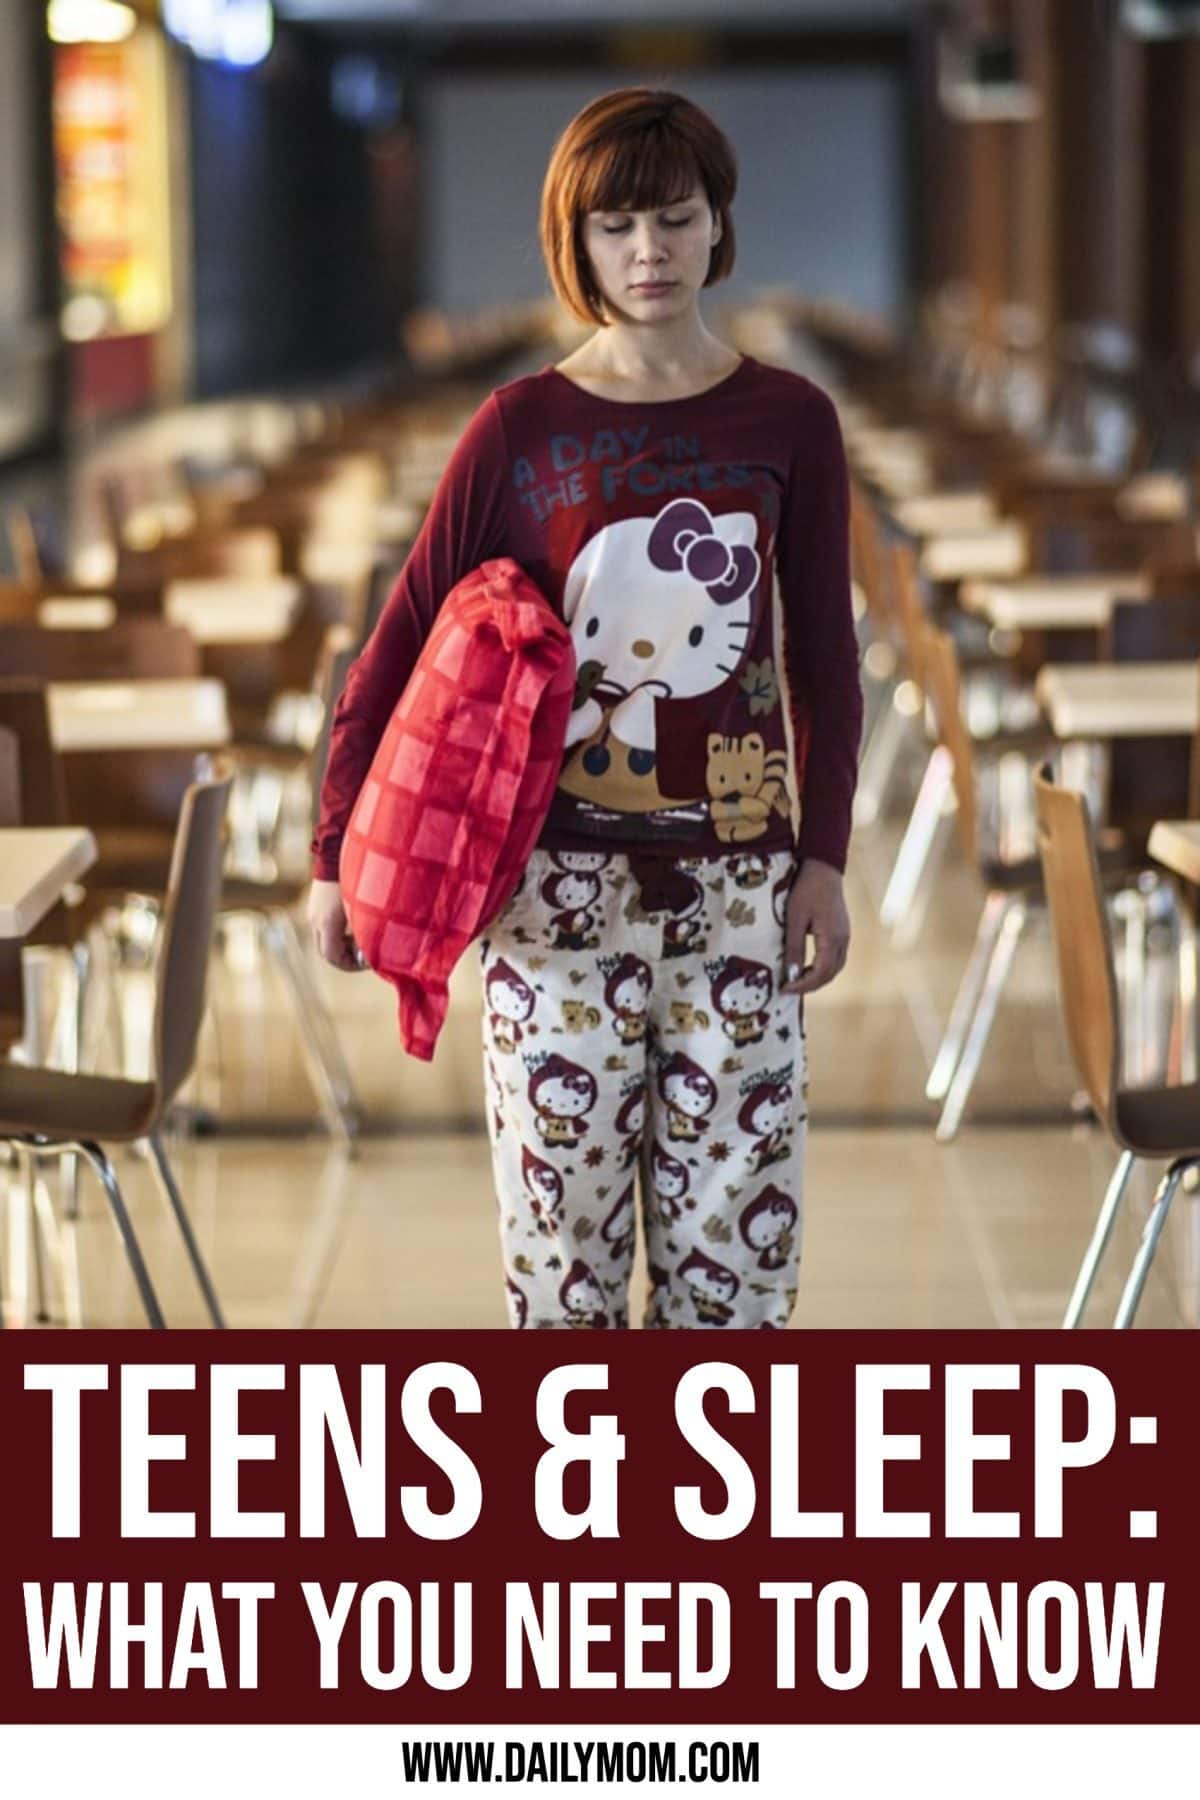 Teens And Sleep: What You Need To Know For Optimal Development